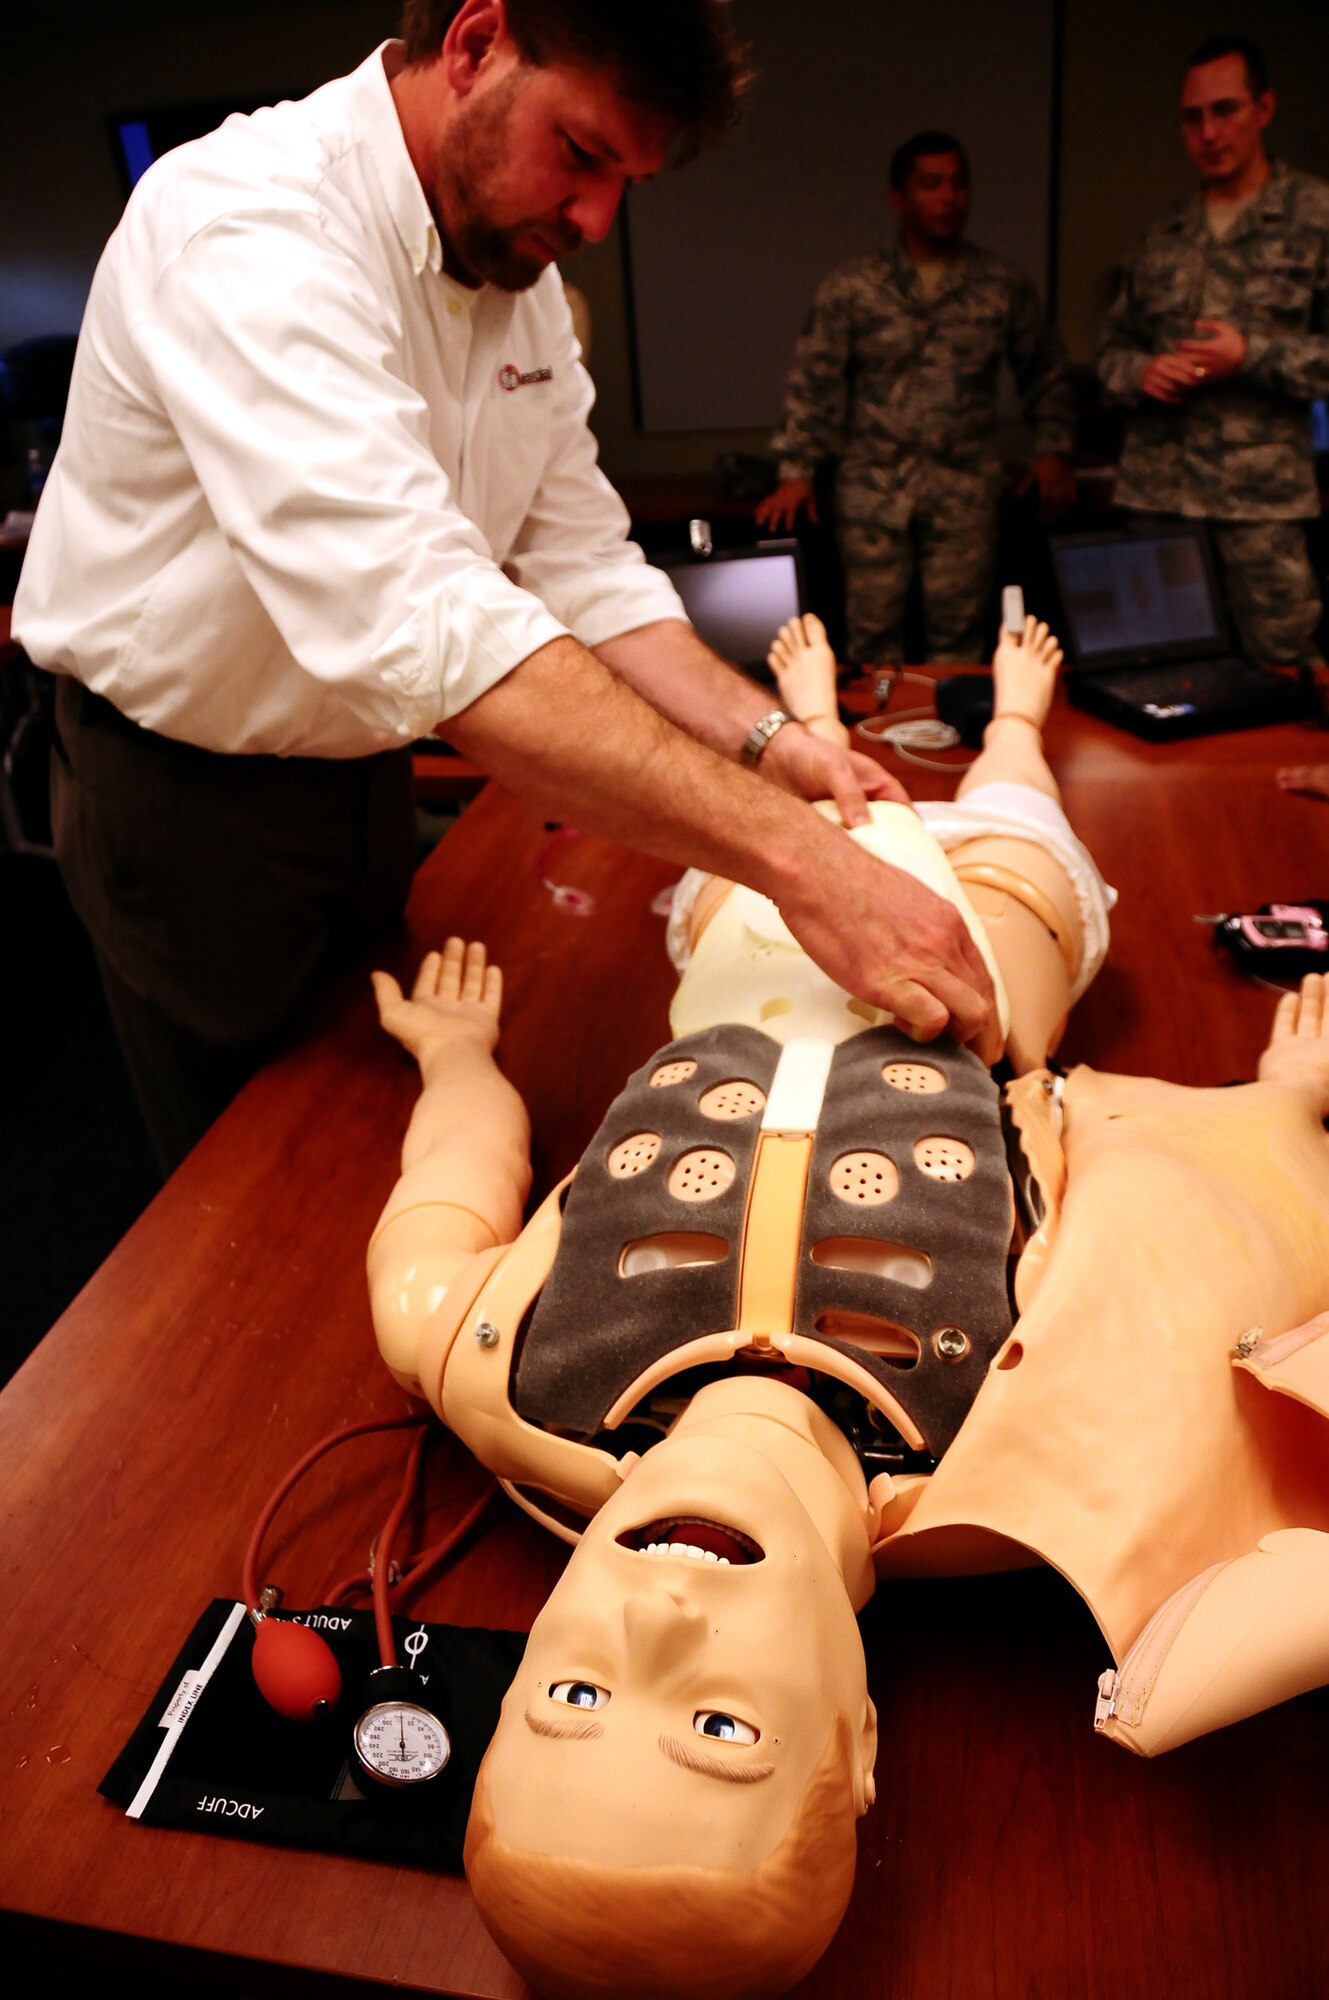 ANDERSEN AIR FORCE BASE, Guam – Daniel Beelitz, Simulation and Military Specialist for a major medical equipment manufacturer, demonstrates the capabilities of a SimMan 3G mannequin Aug. 5, at the Commando Warrior Regional Training Center. SimMan 3G, a realistic human patient simulator created by a major medical equipment manufacturer,  is designed to provide a more hands on training experience for emergency responders and medics. The 736th Security Forces Squadron’s Commando Warrior Pacific Air Forces Regional Training Center now possesses two. (U.S. Air Force photo by Airman 1st Class Anthony  Jennings)